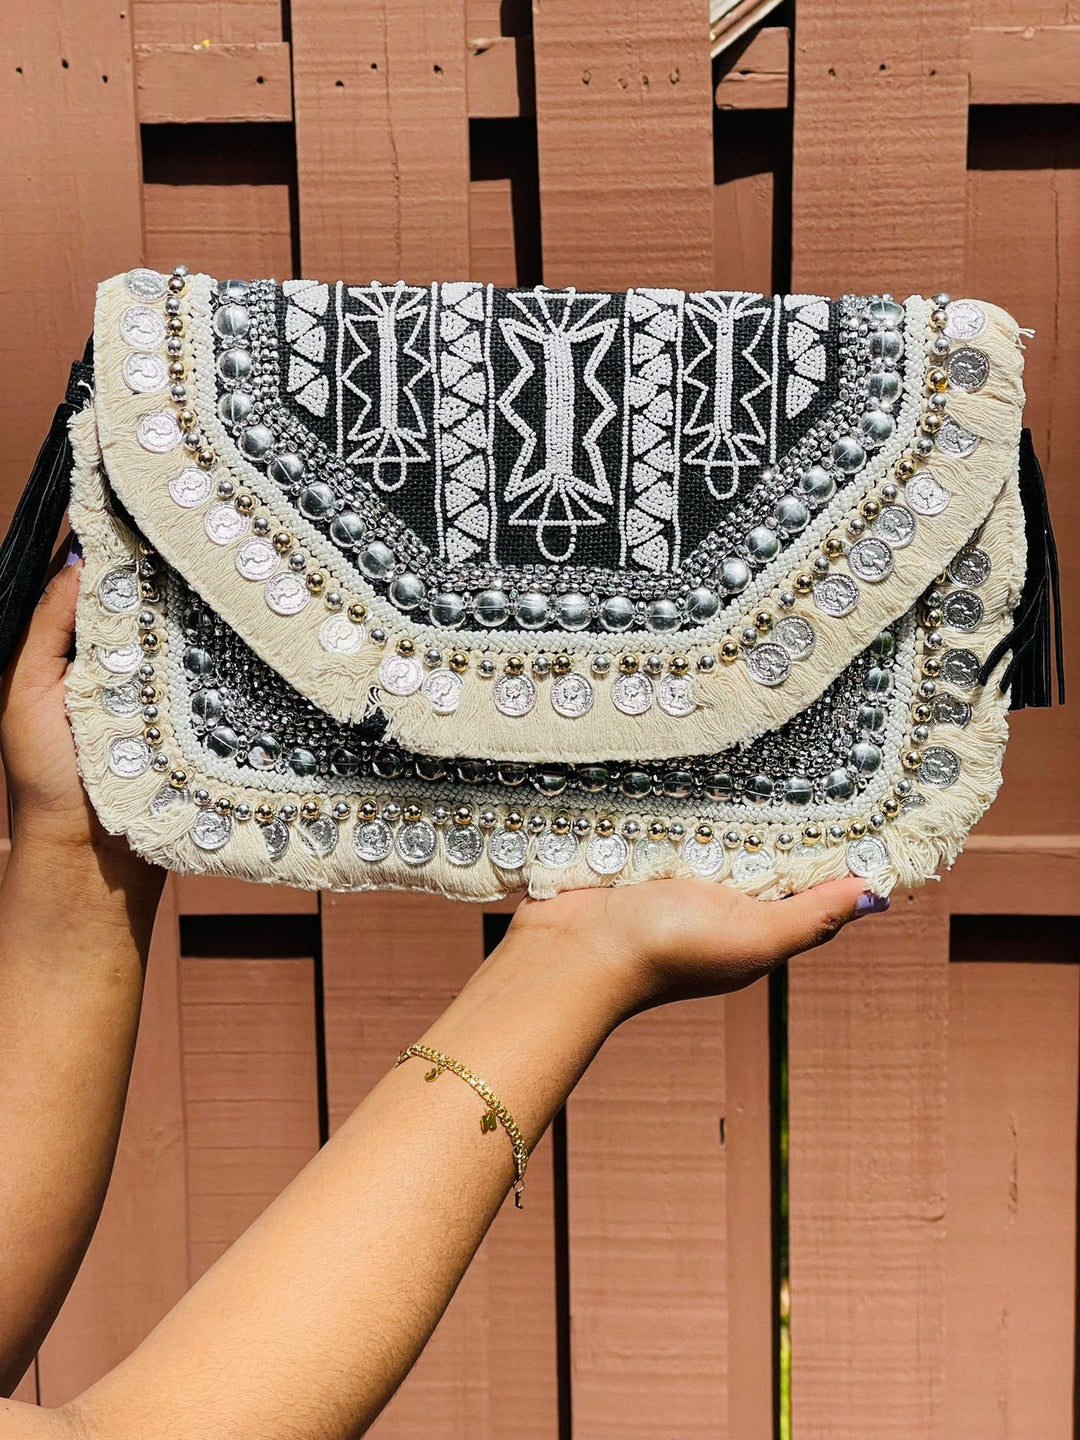 Black and White Aztec Bohemian Bag - Mother's Day Gift